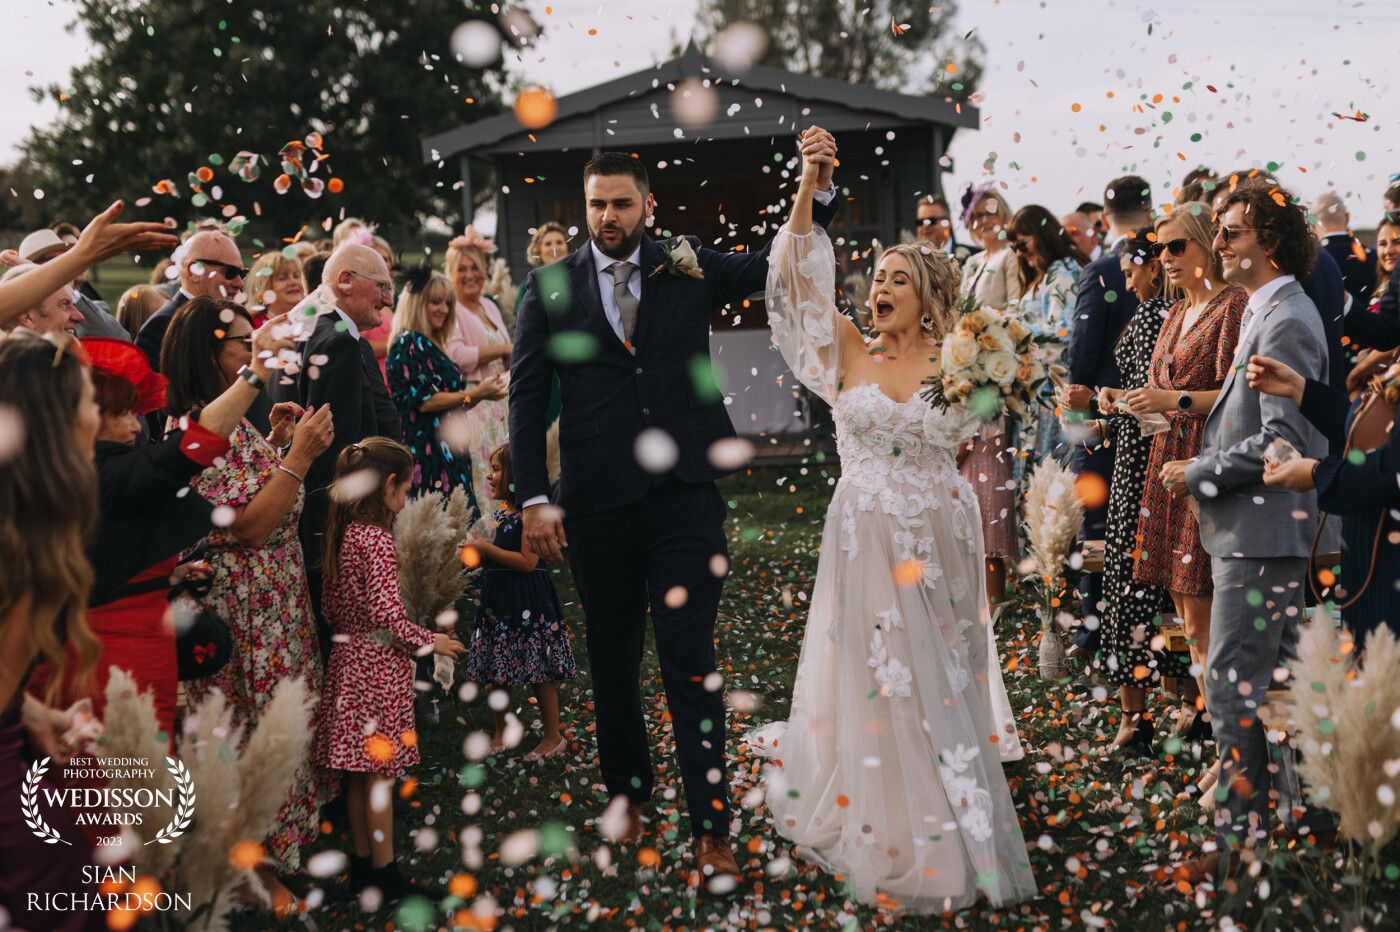 This couple were asking how to get the best confetti shot so I pointed them in the direction of my fav biodegradable confetti supplier, and told them to enjoy themselves as they walked down. Then this magic was created.